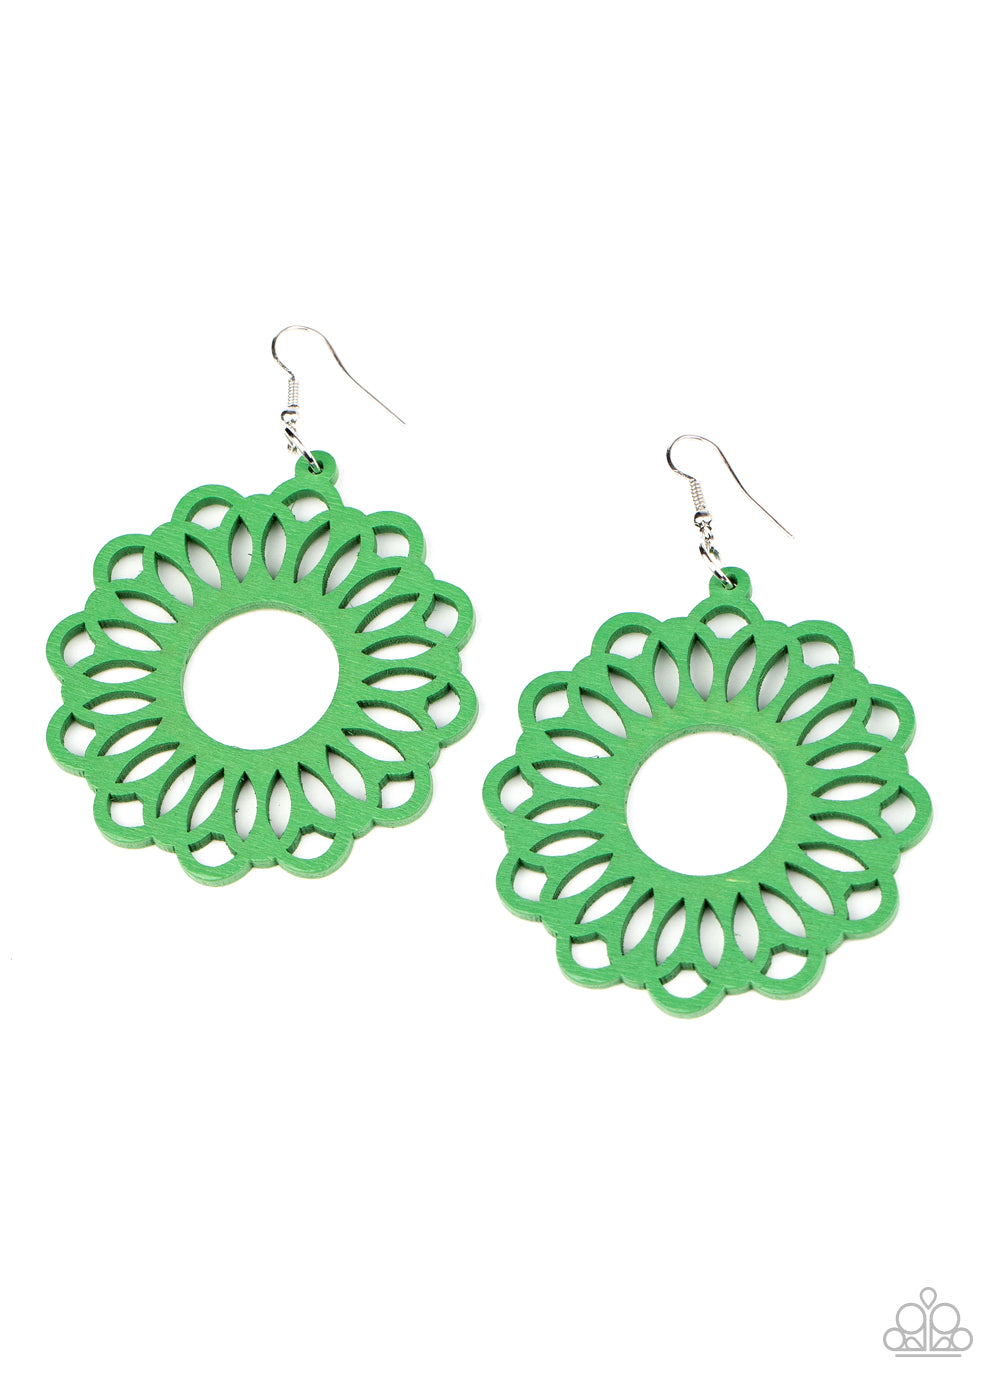 Paparazzi - Painted in a refreshing green finish, an airy wooden frame is cut into a whimsical stenciled pattern for a colorful floral look. Earring attaches to a standard fishhook fitting.